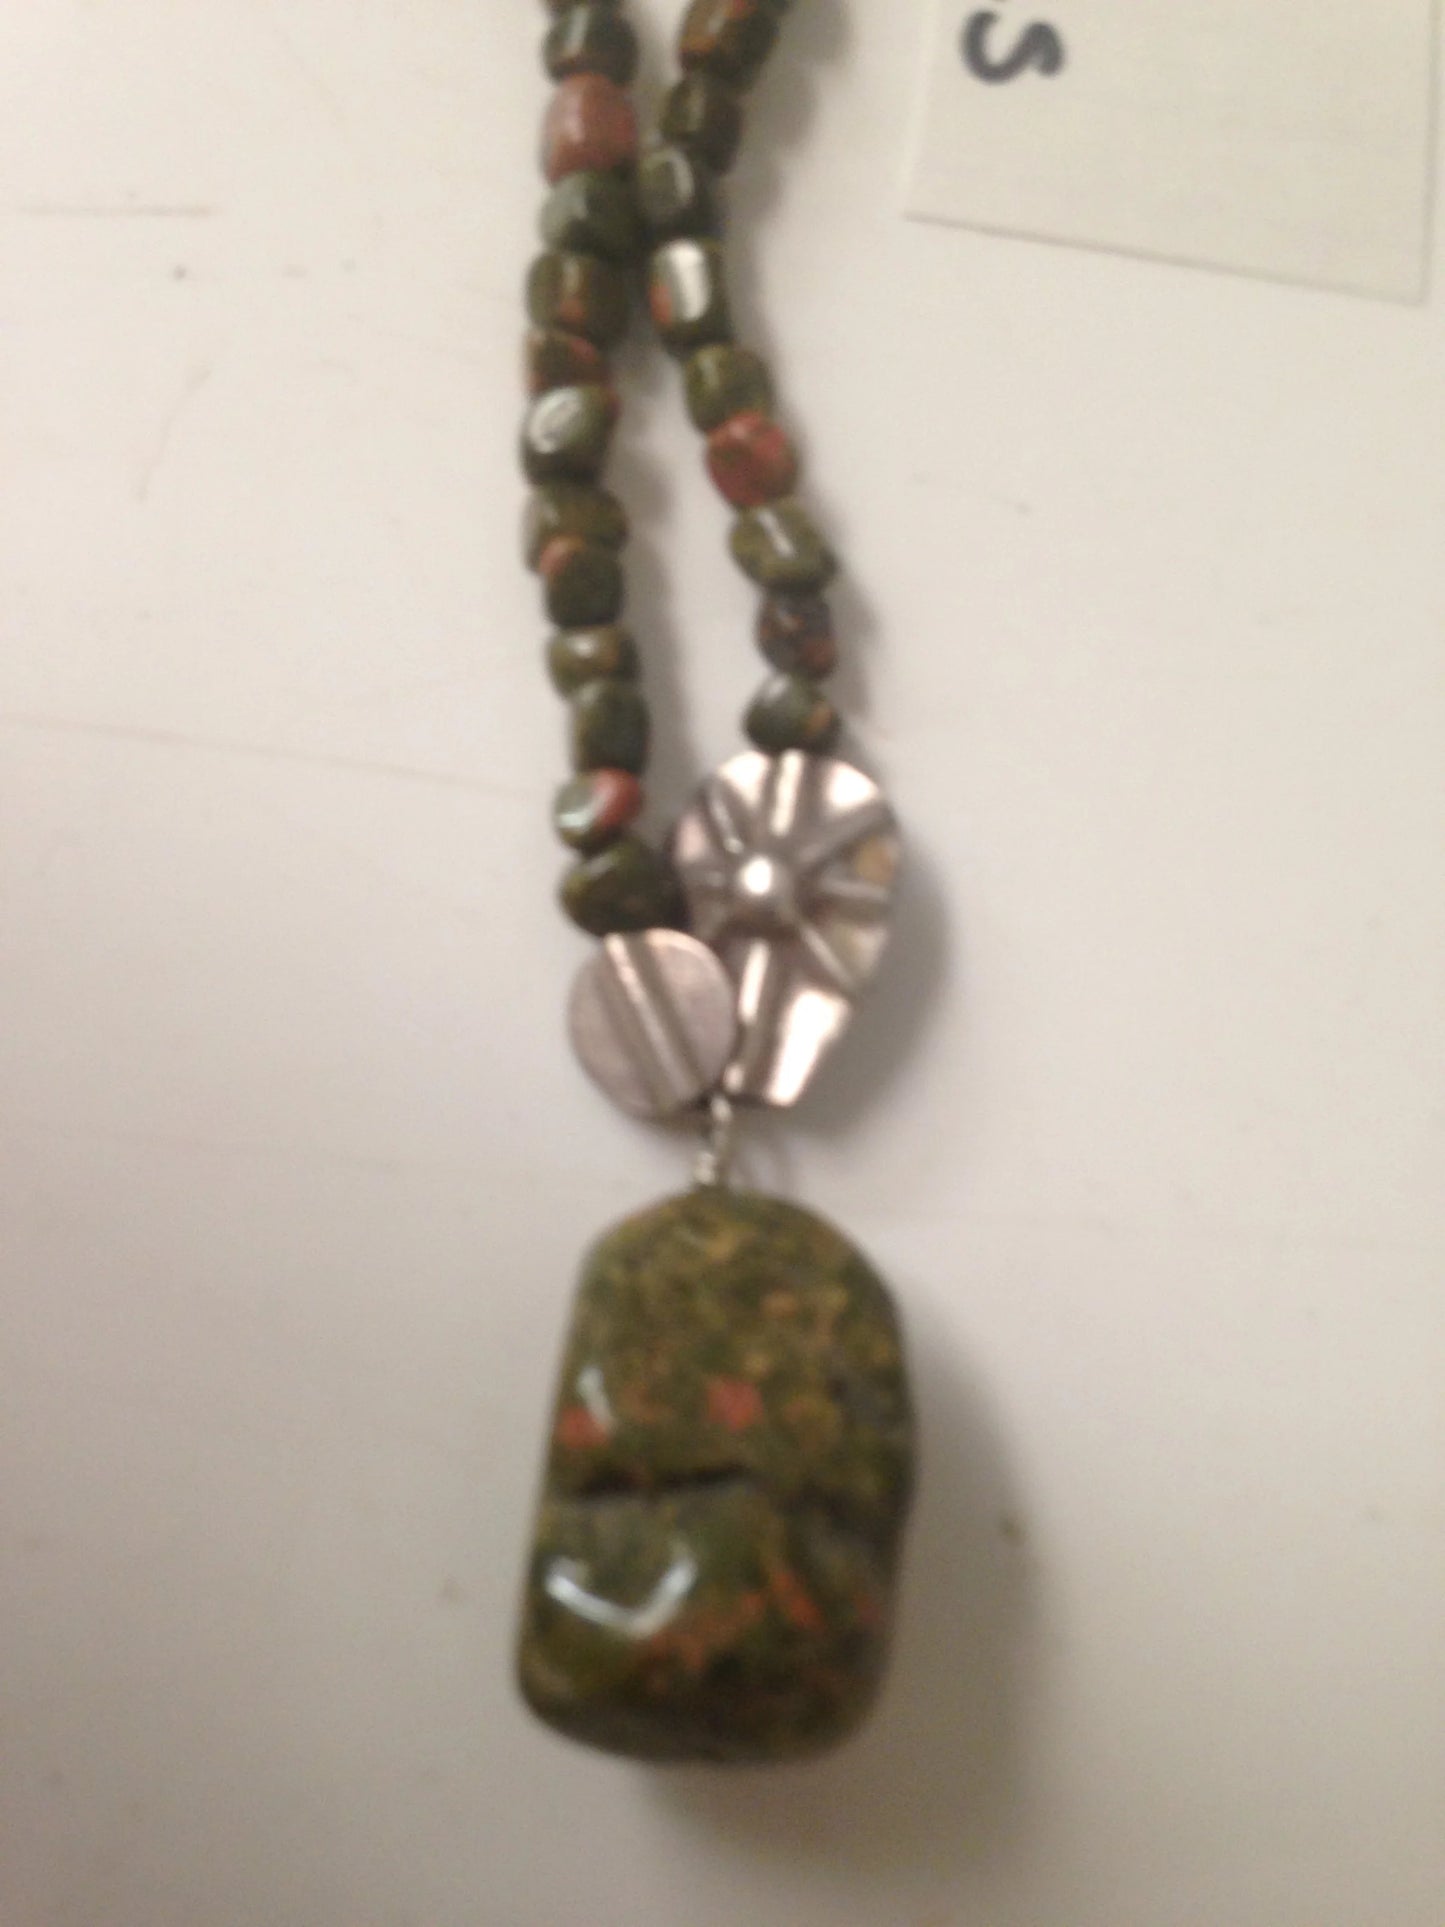 16" Unakite and Silver Necklace